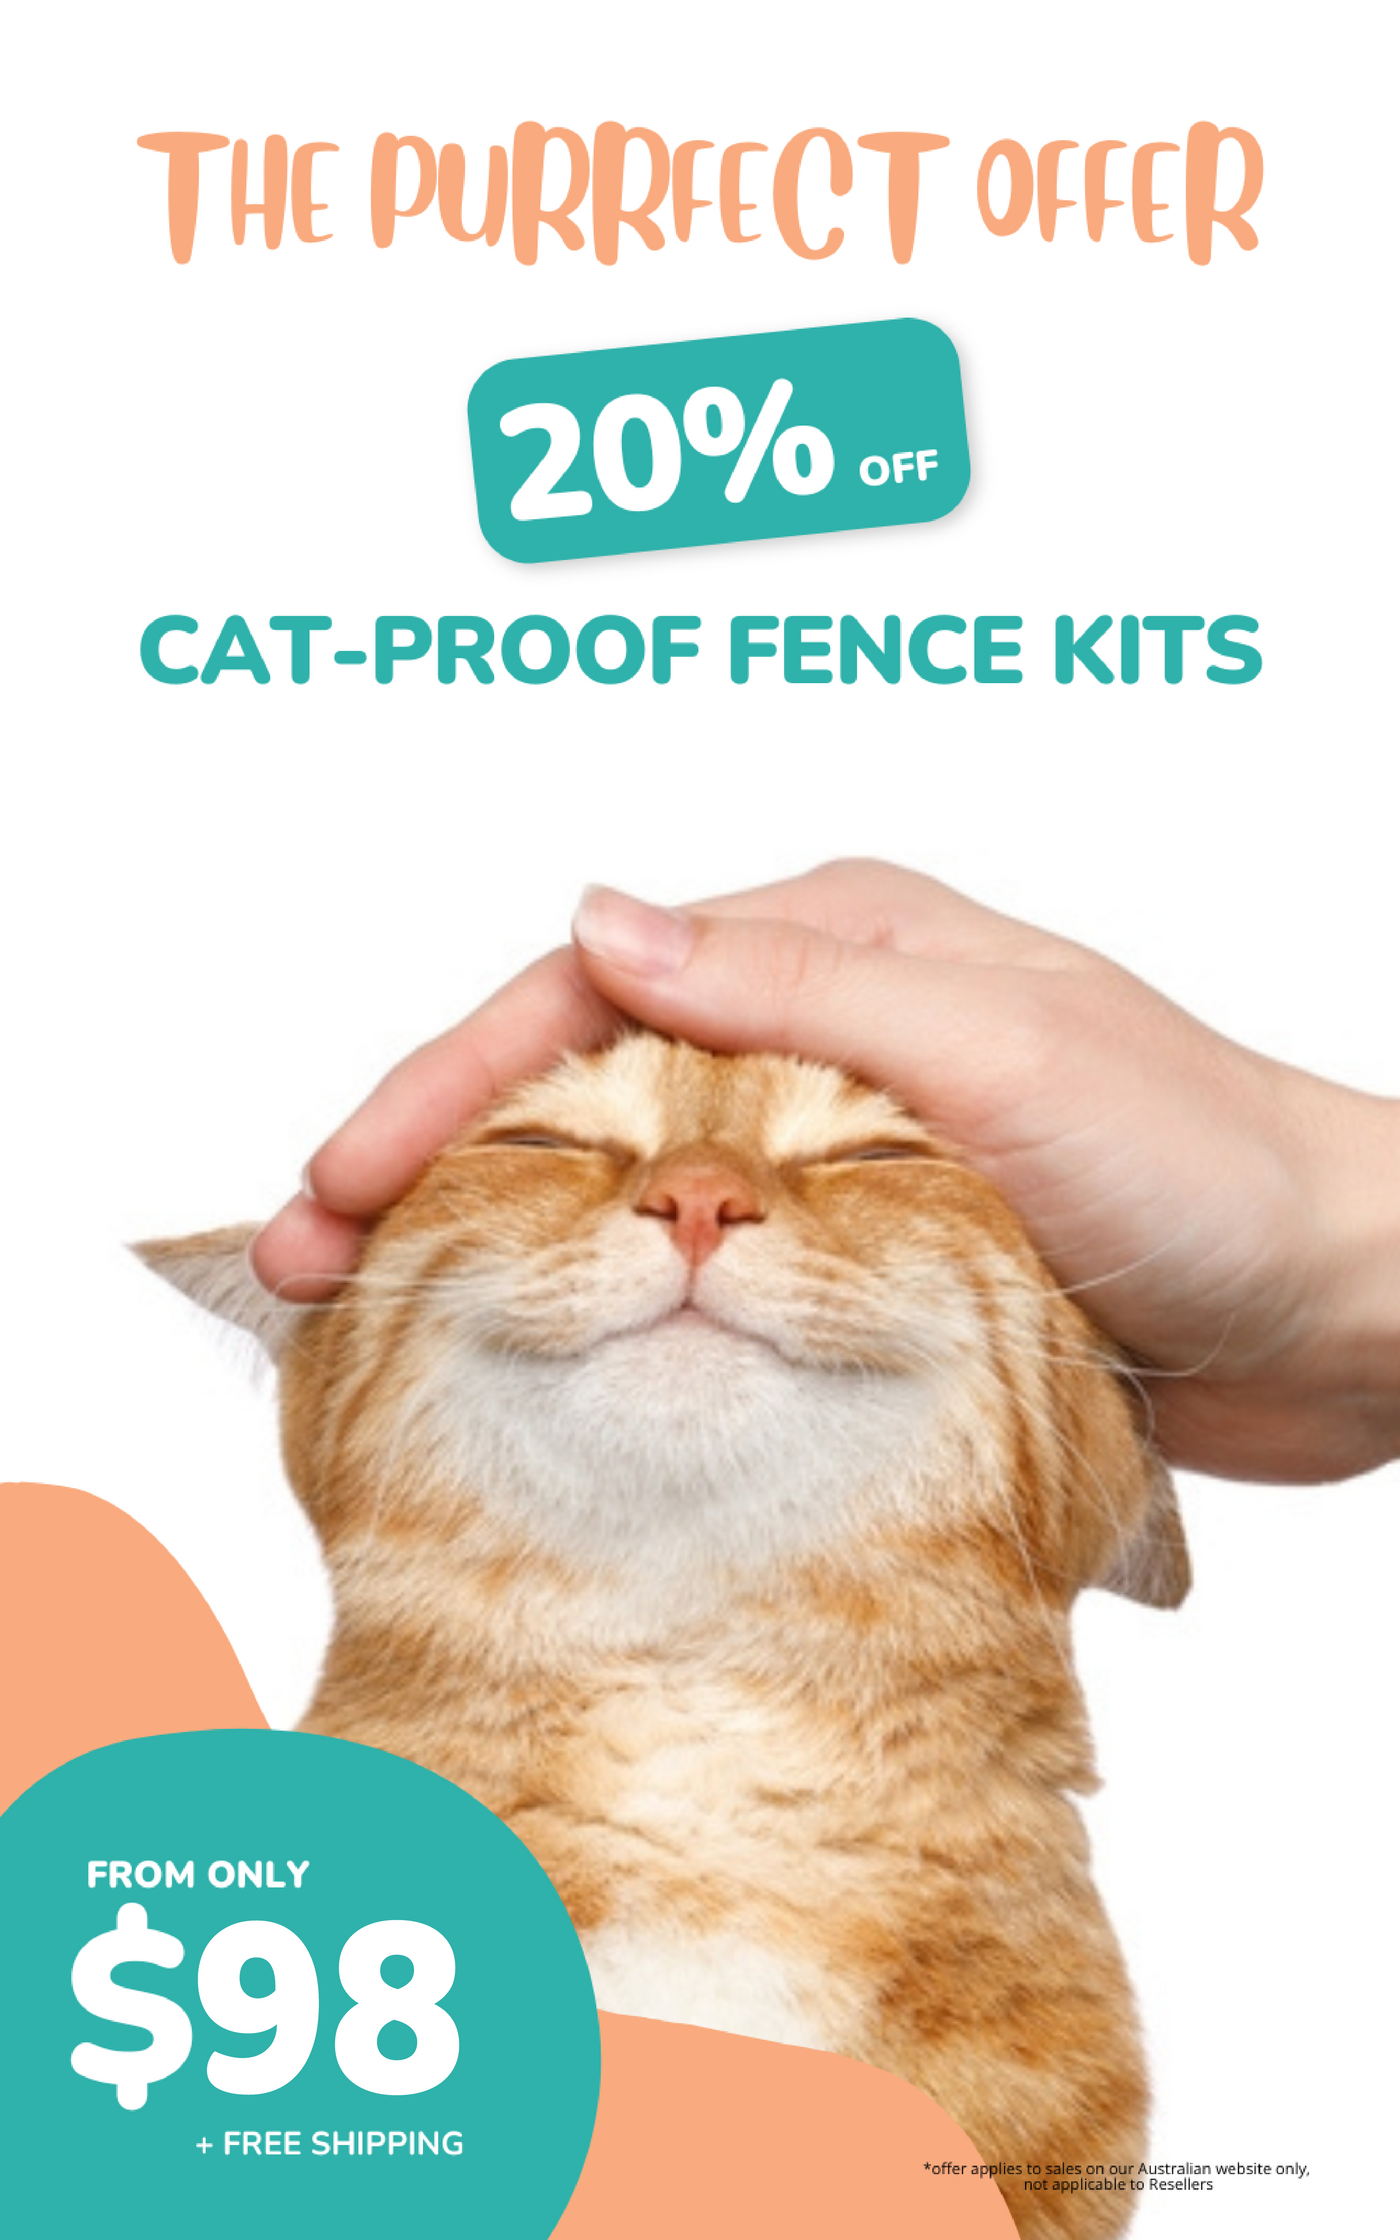 cat proof fence kits on sale - 20% percent off by Oscillot